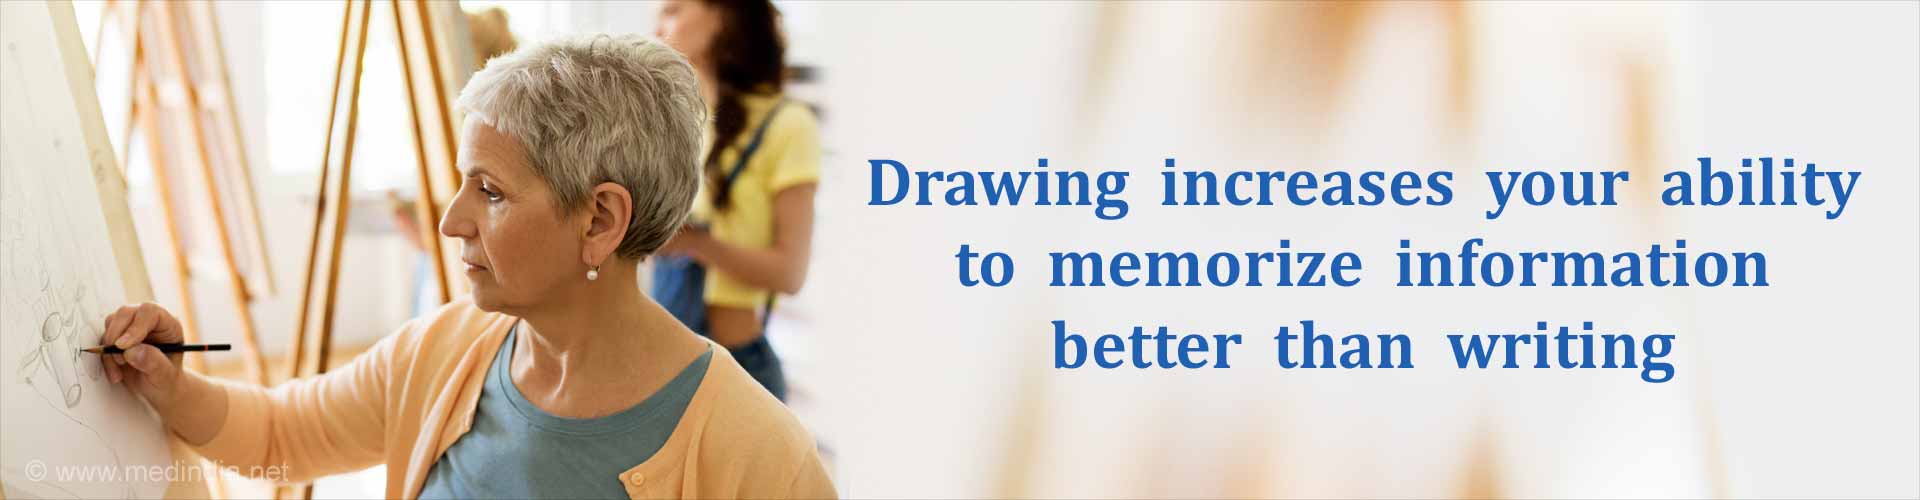 Drawing increases your ability to memorize information better than writing.
